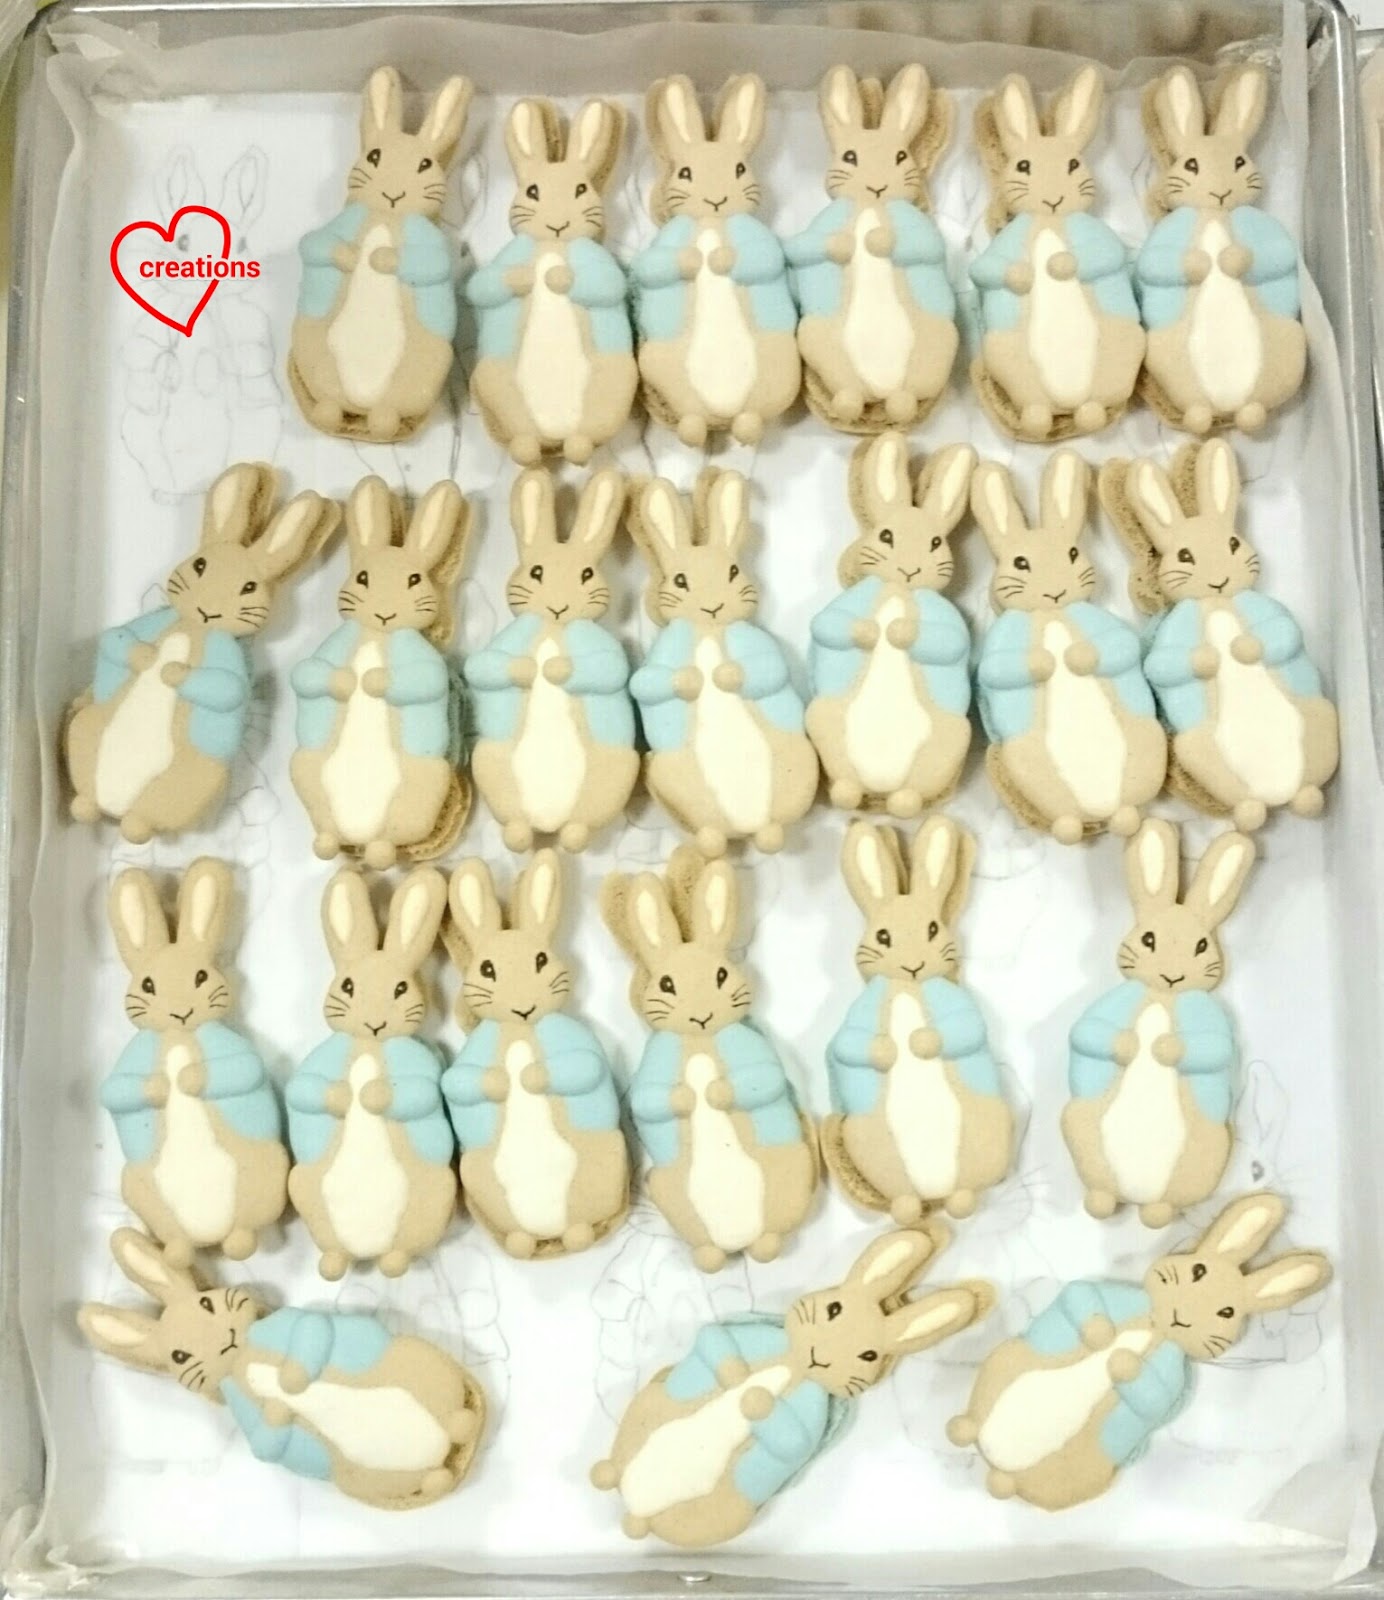 loving-creations-for-you-peter-rabbit-macarons-with-dark-chocolate